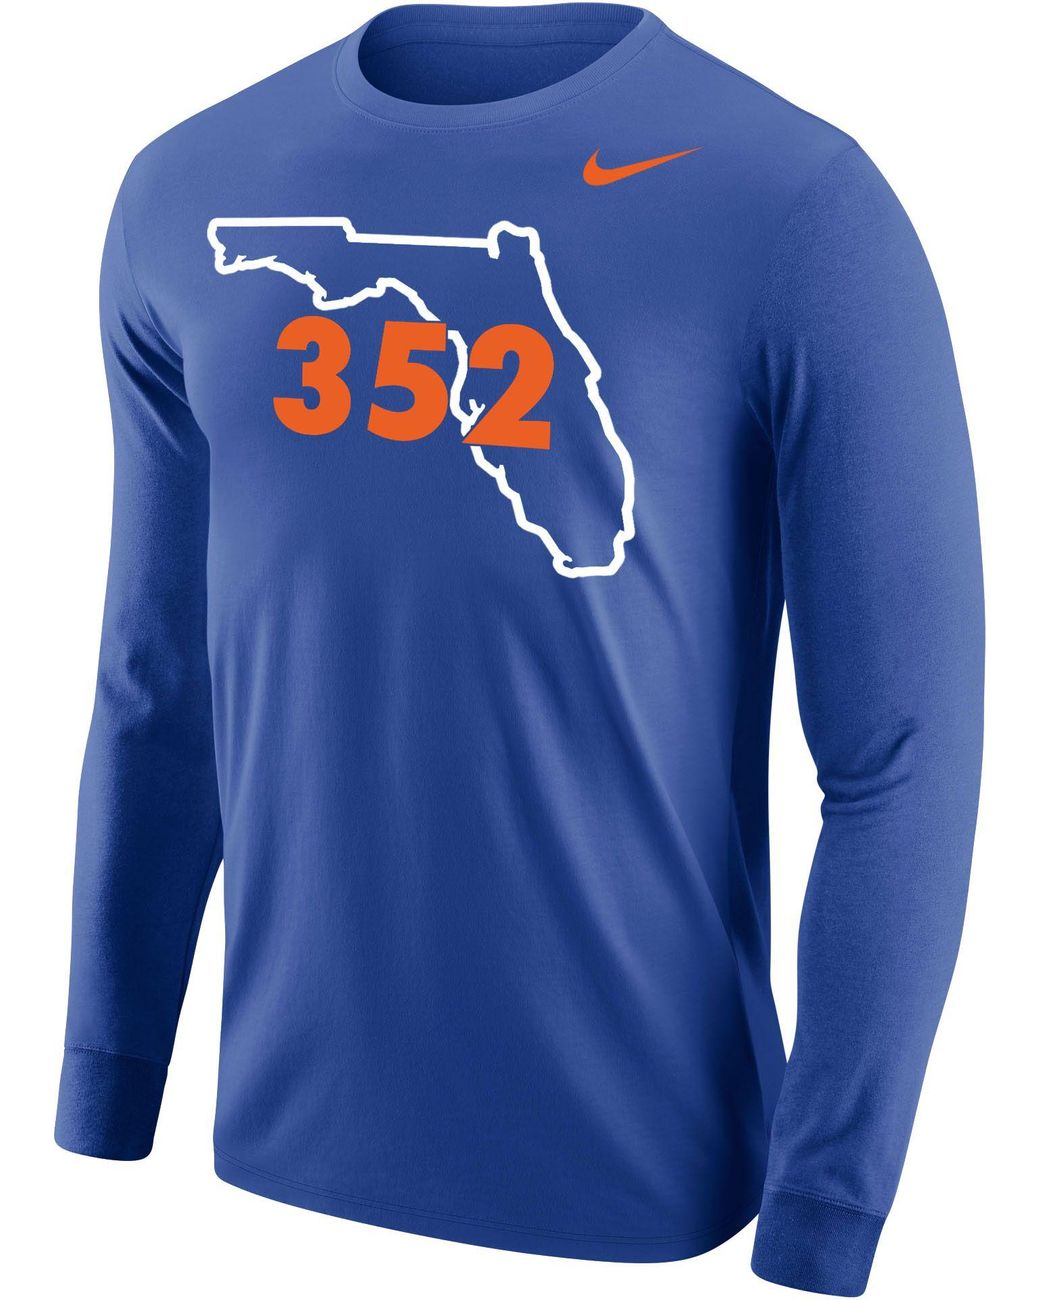 Nike 352 Area Code Long Sleeve T-shirt in Blue for Men - Lyst